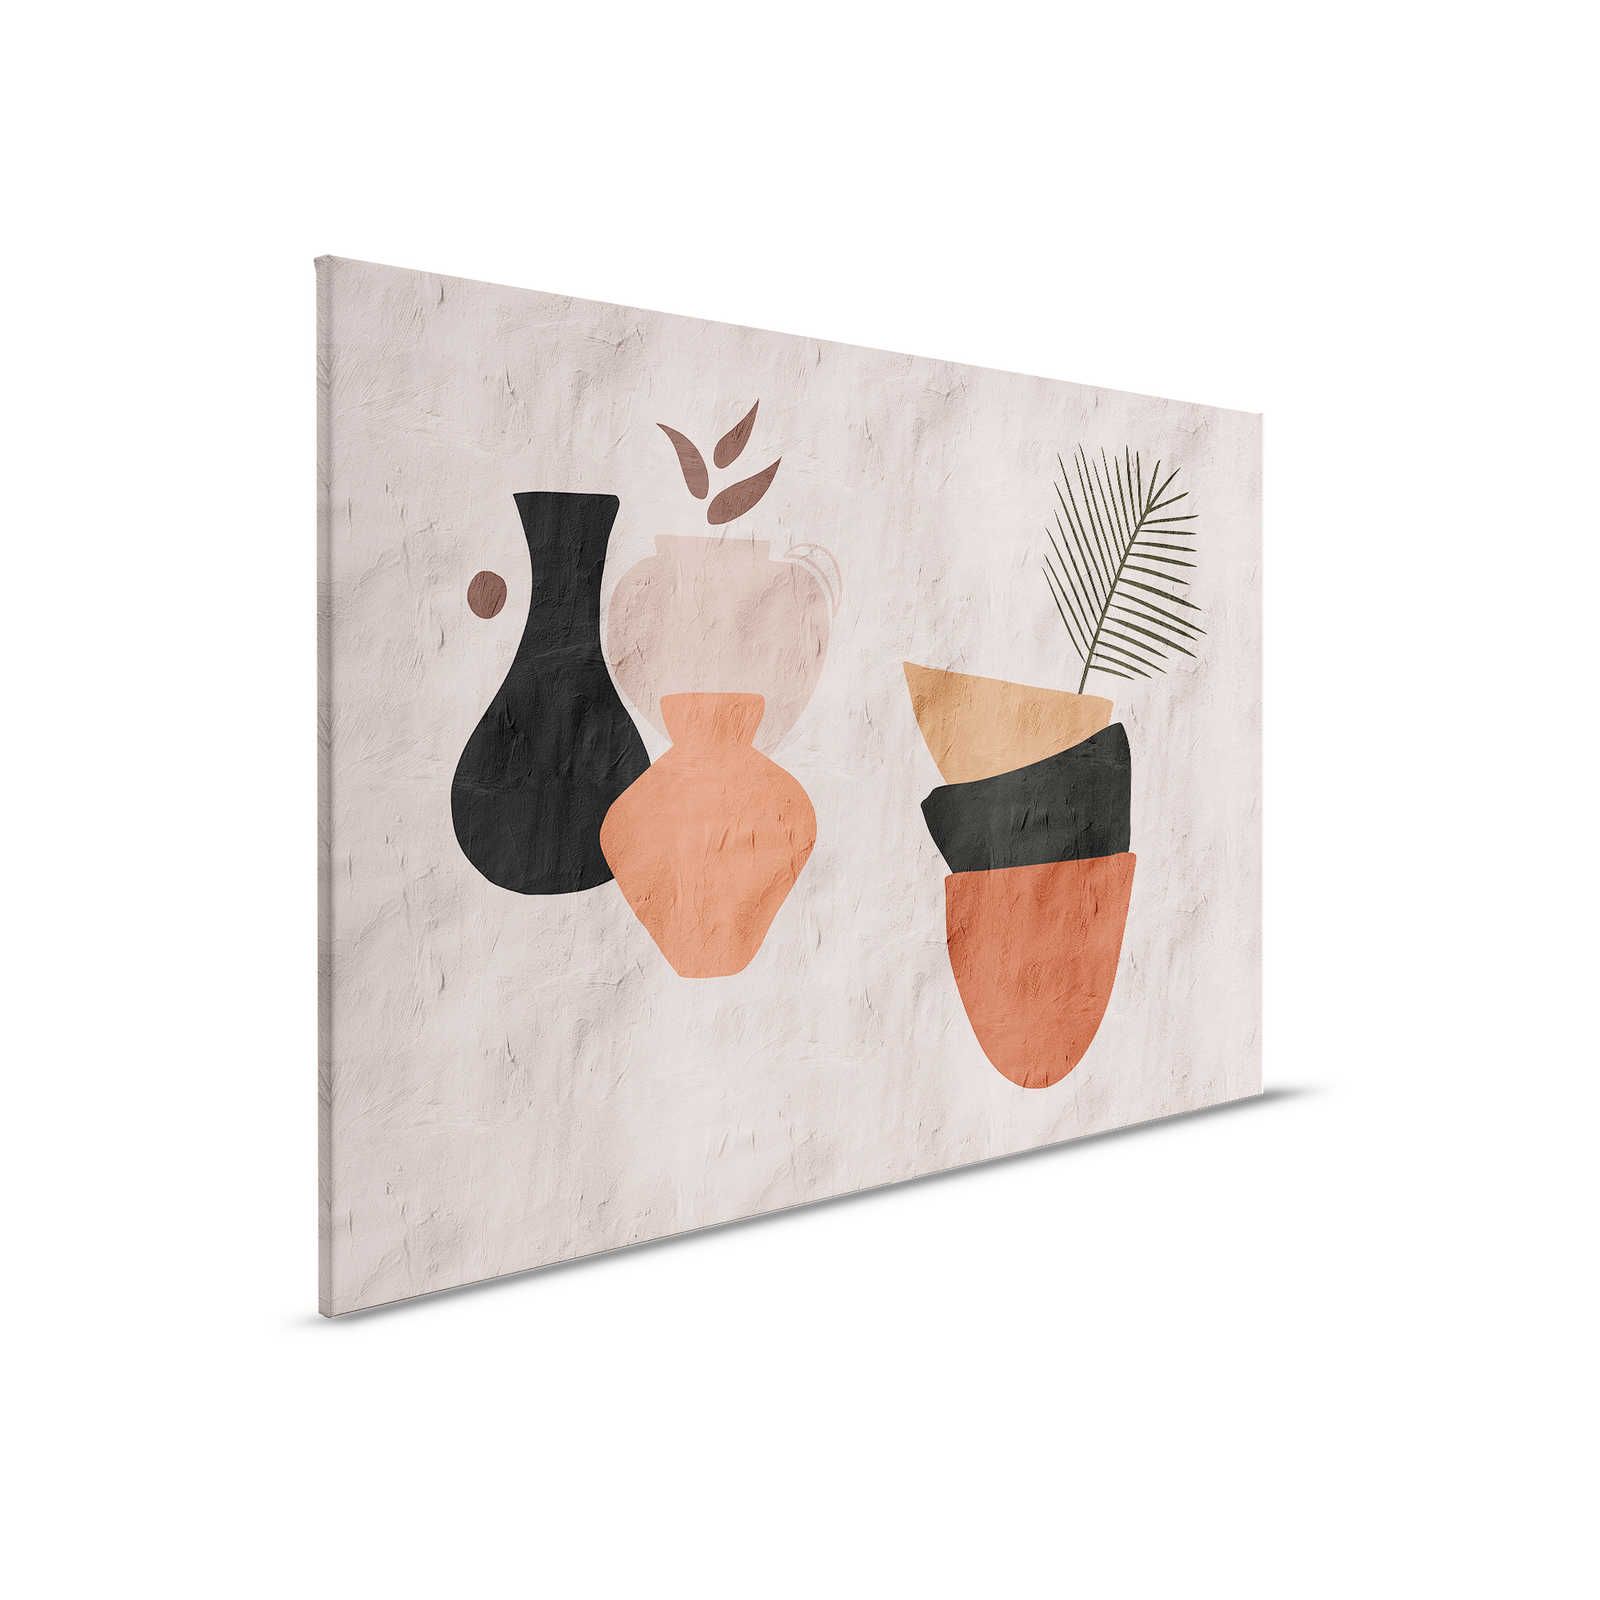         Santa Fe 2 - Clay Wall Canvas Painting with Colour Block Design - 0.90 m x 0.60 m
    